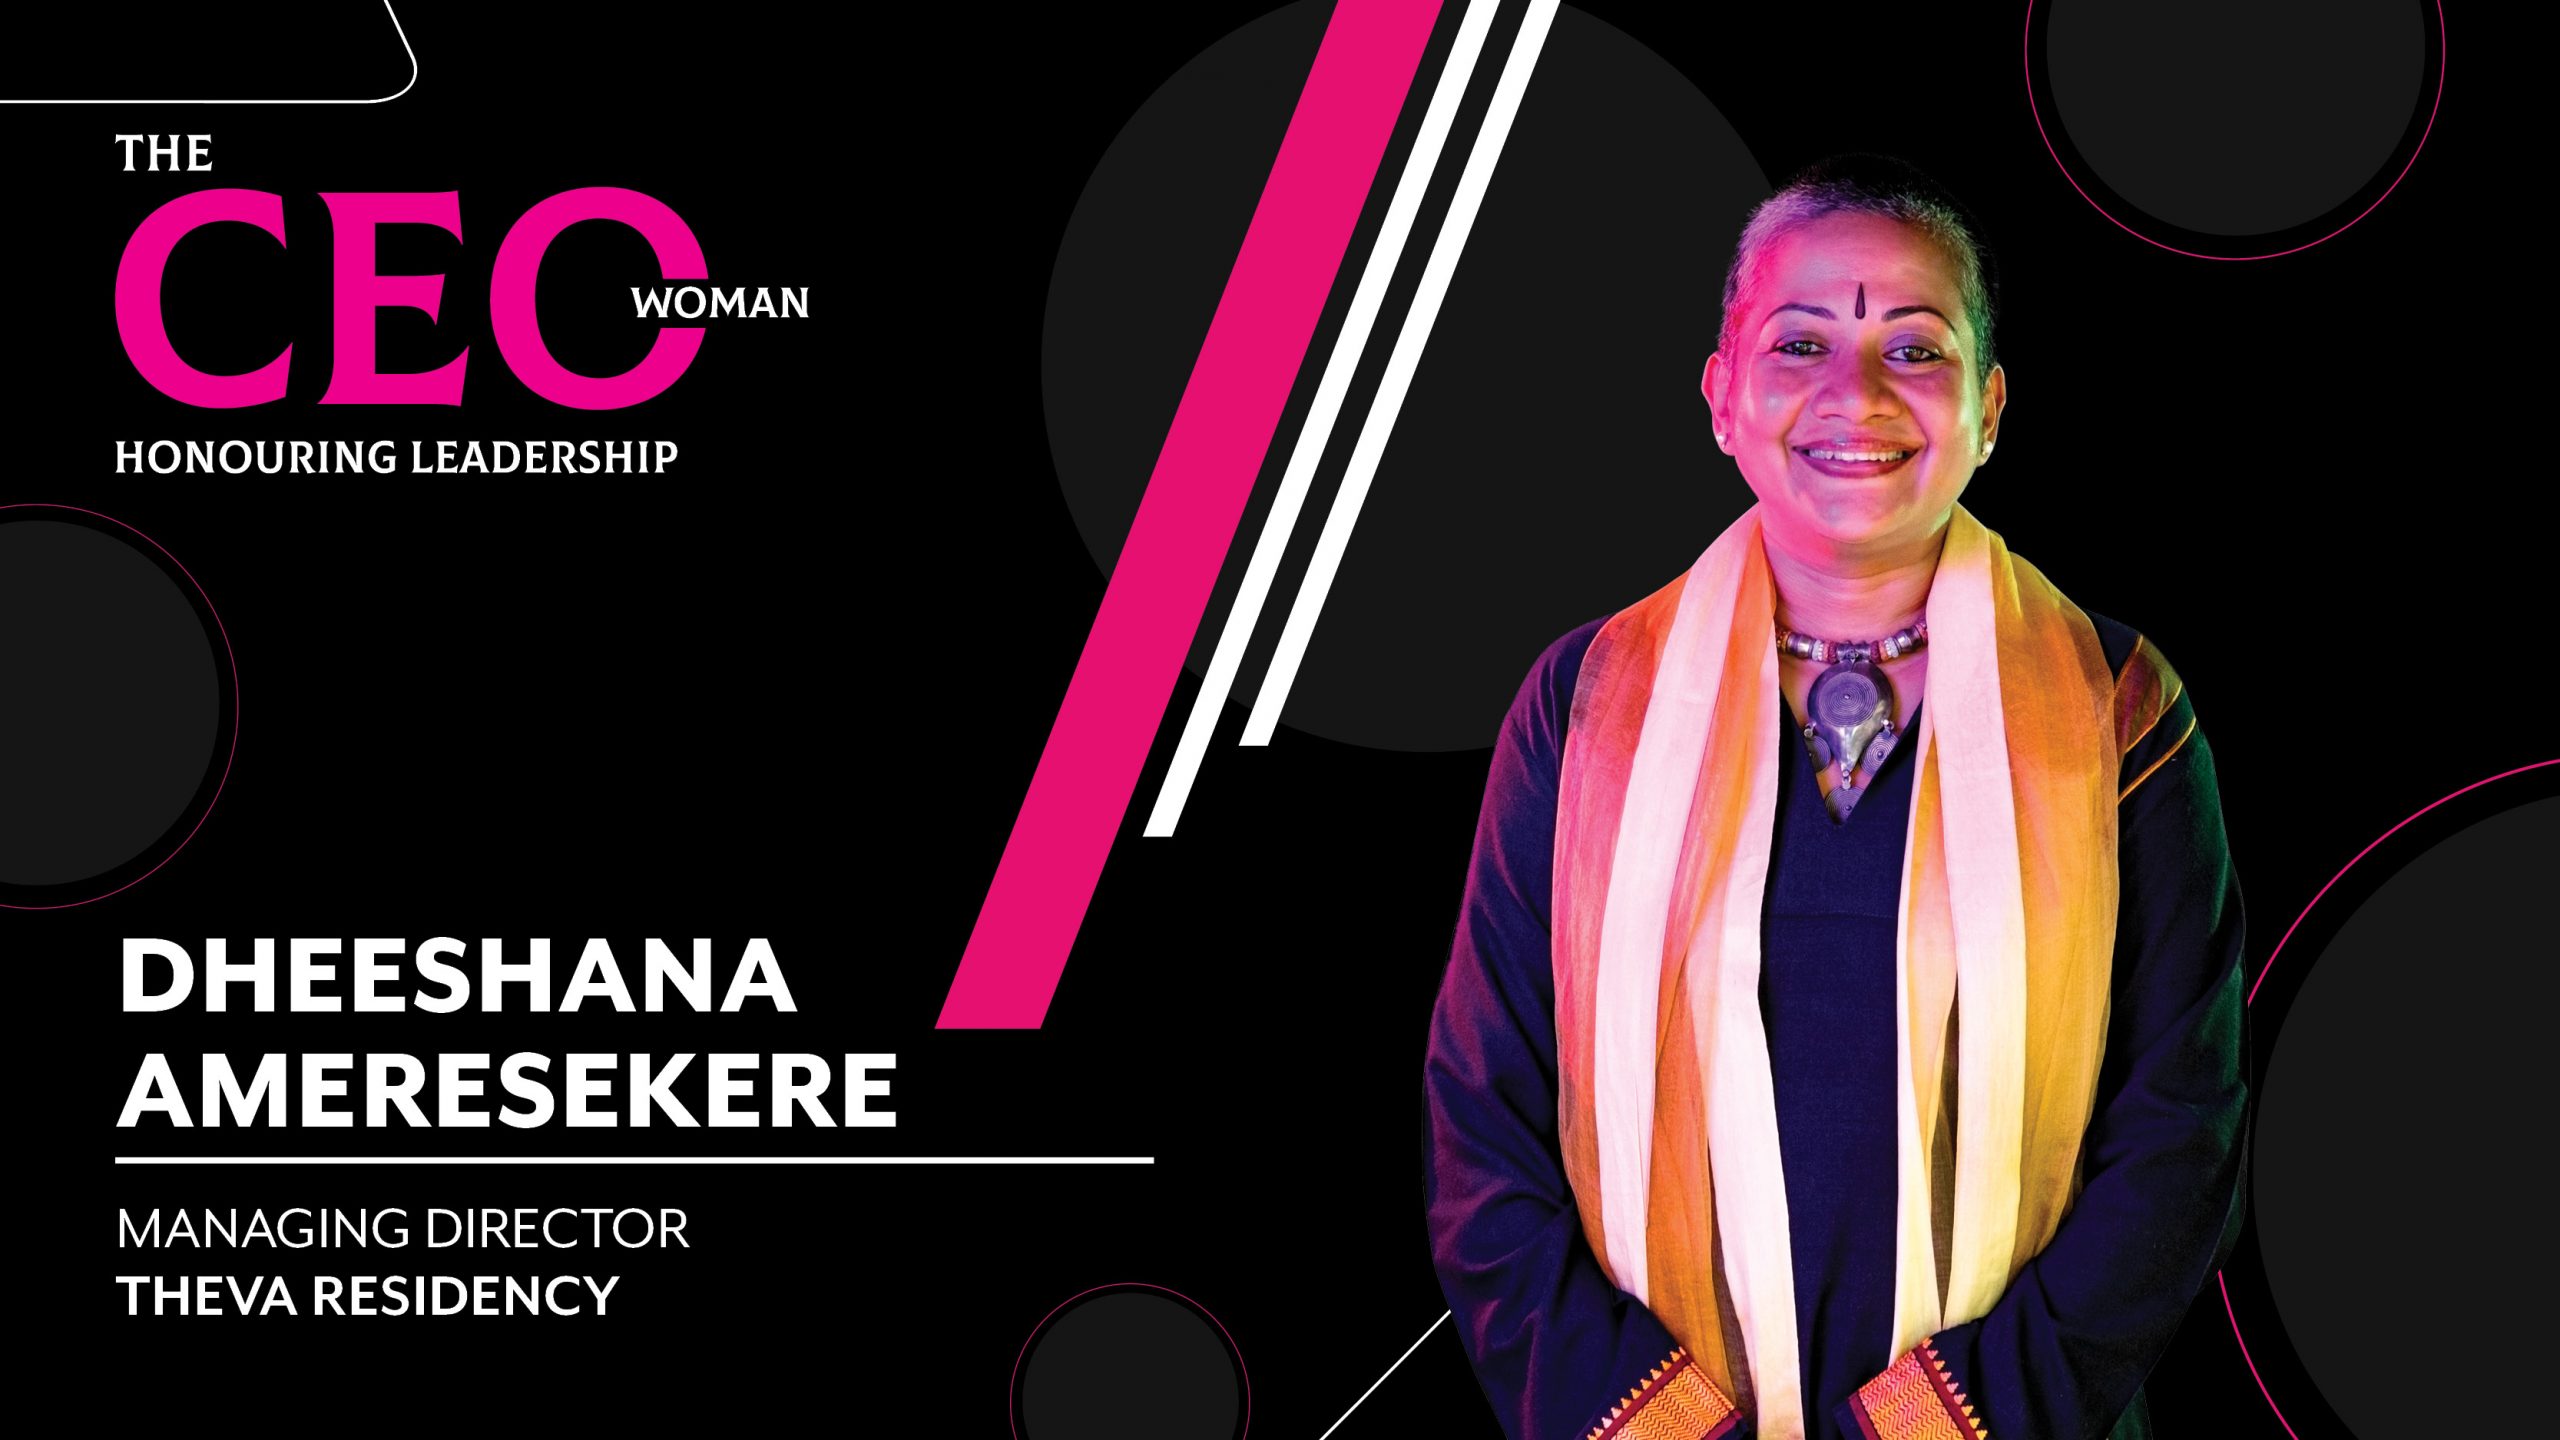 The Untouched Power of a Soulful Woman – the Managing Director of Theva Residency, Dheeshana Ameresekere